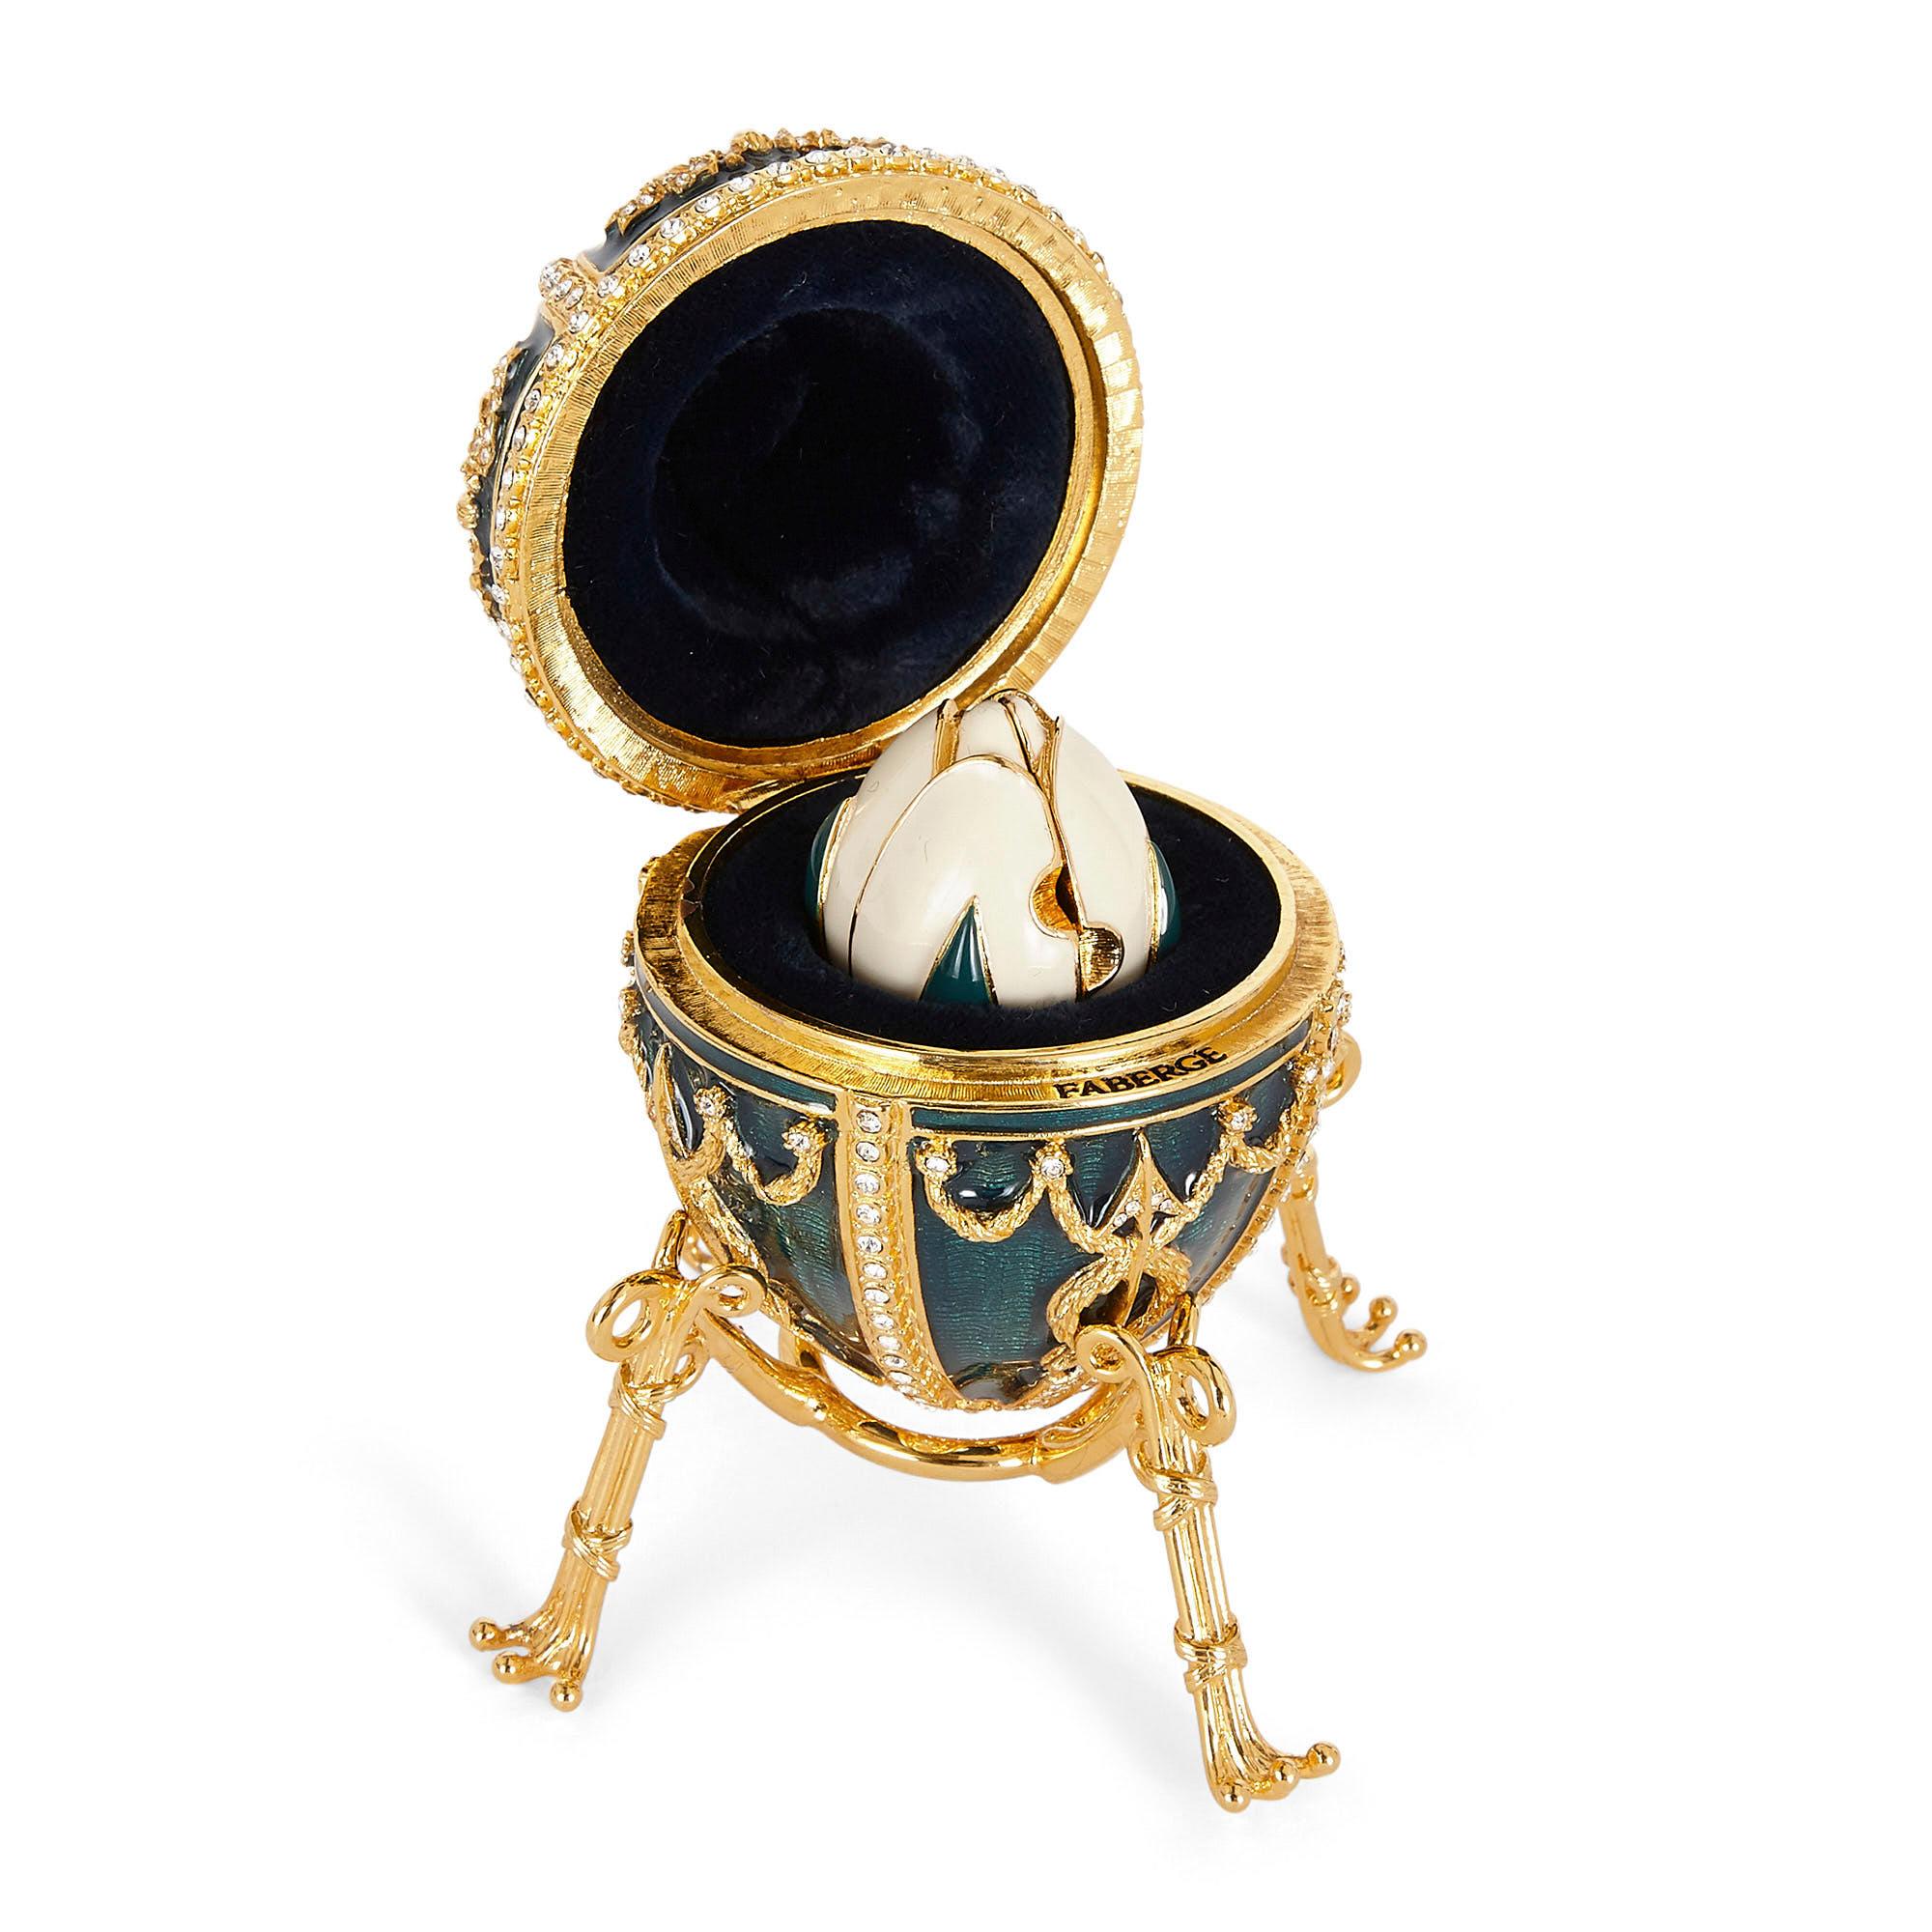 Unknown Contemporary Fabergé Easter Egg with Green Guilloché Enamel and Gemstones